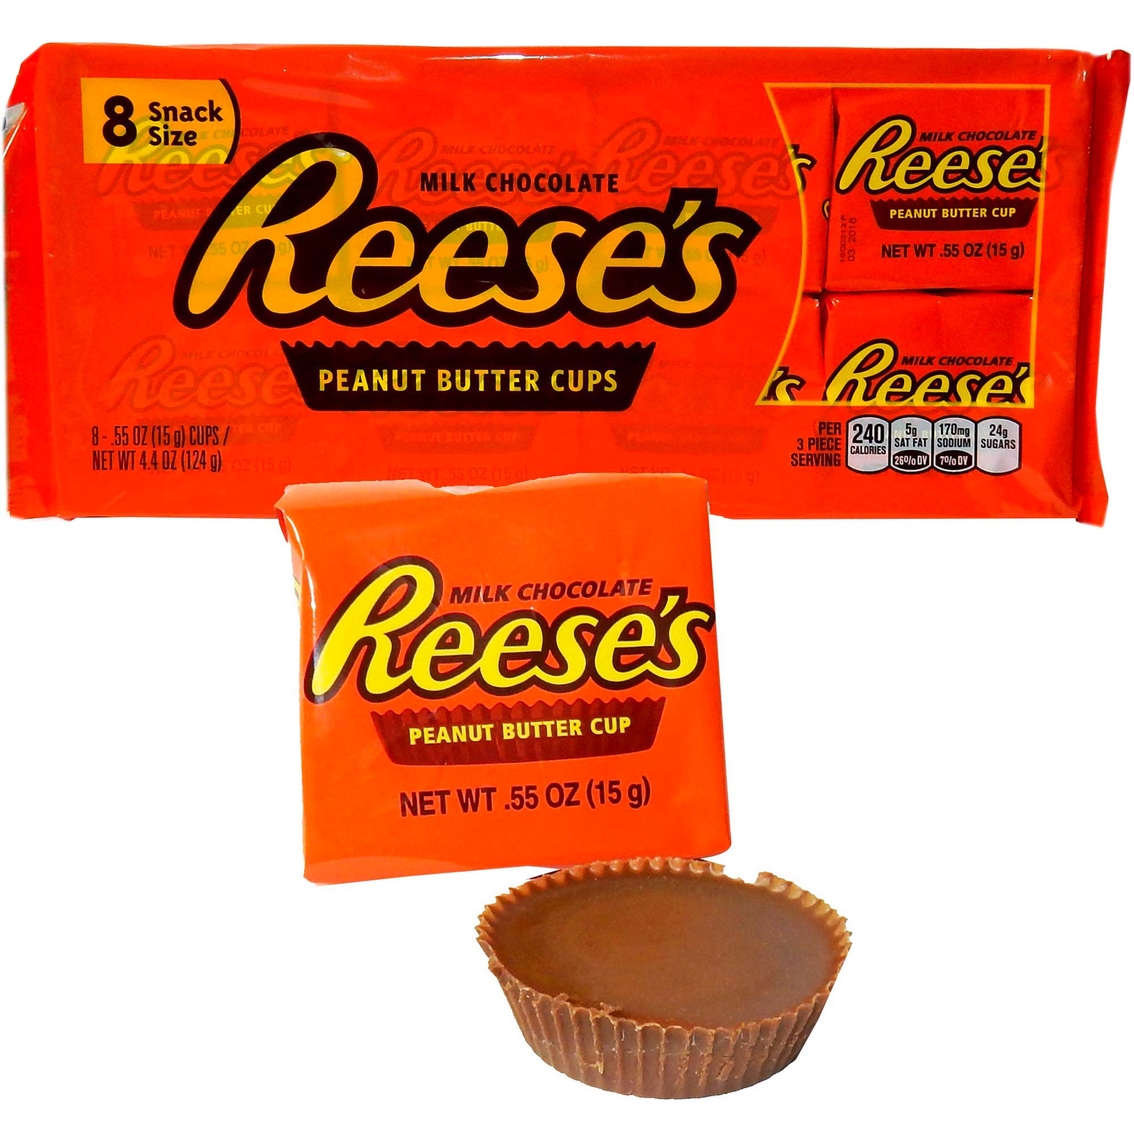 Nutrition Reeses Peanut Butter Cup – Runners High Nutrition